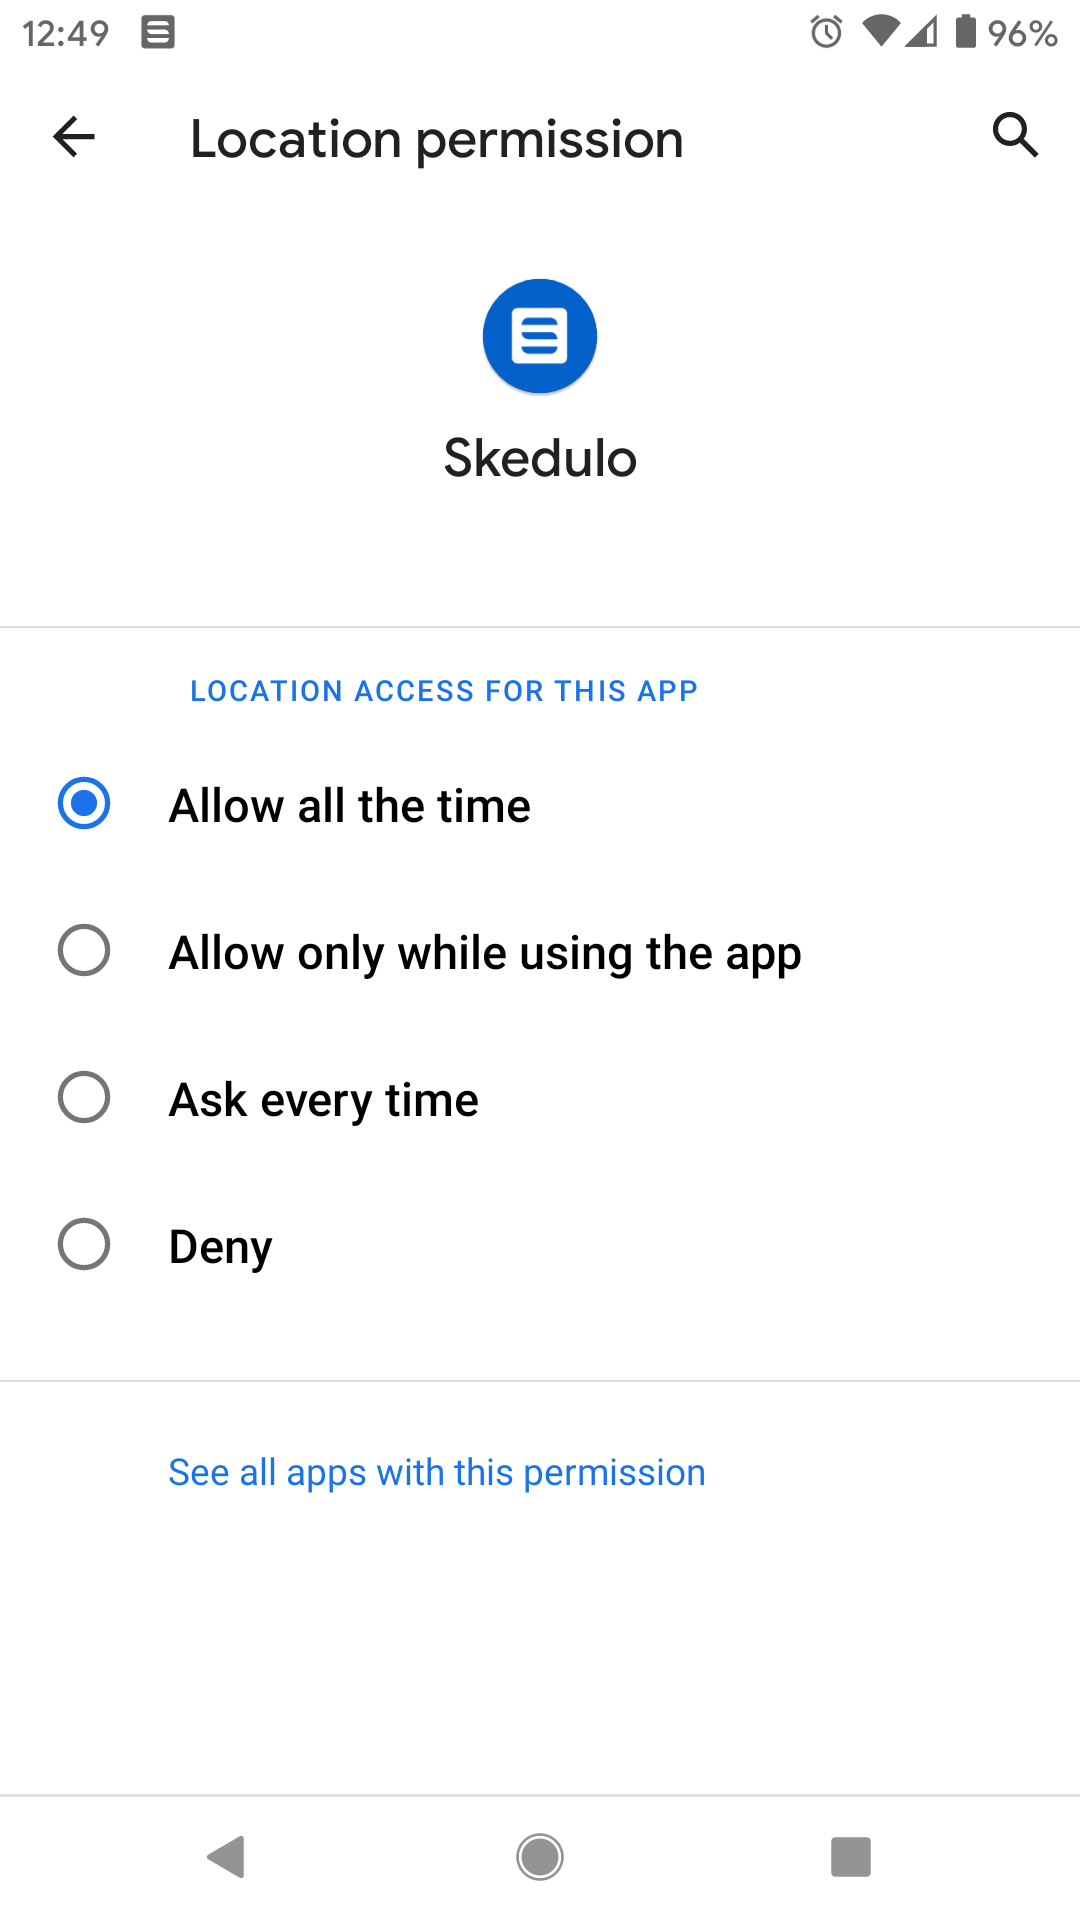 Location permission for the Skedulo app - Location access for this app, select Allow all the time.